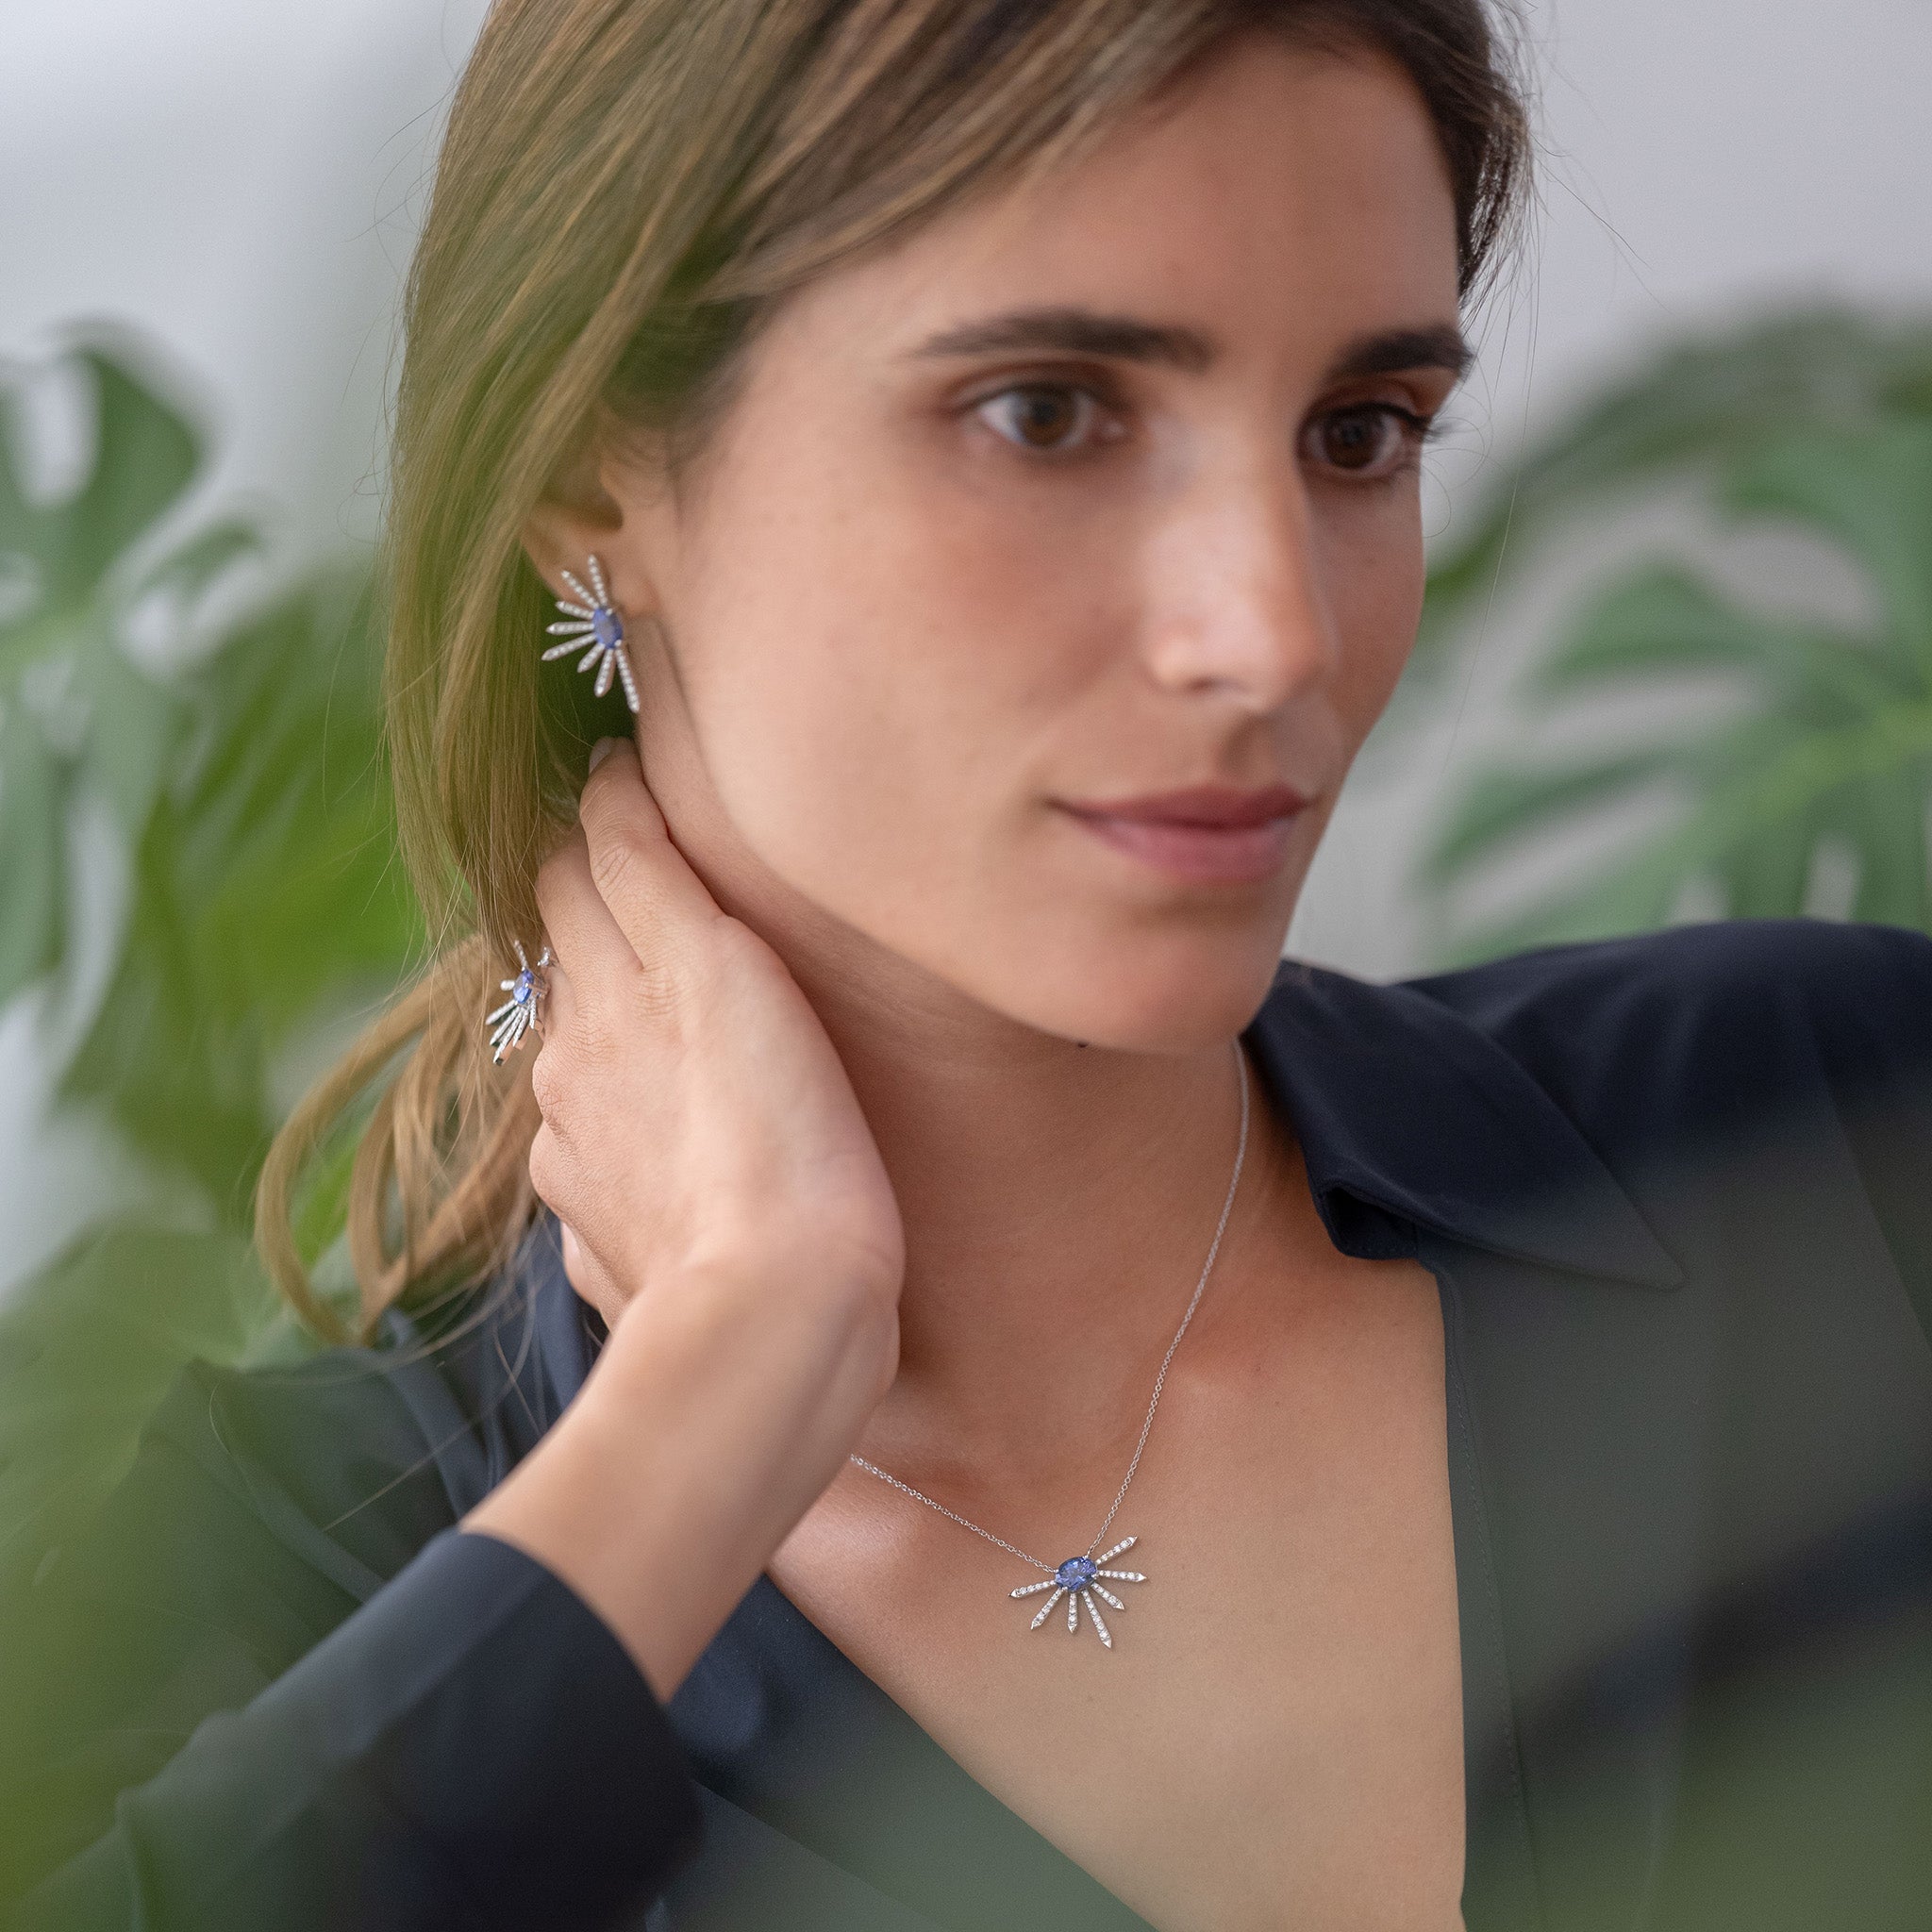 A breathtaking pendant, earrings and ring featuring a stunning Tanzanite center stone surrounded by dazzling diamonds displayed on model. 